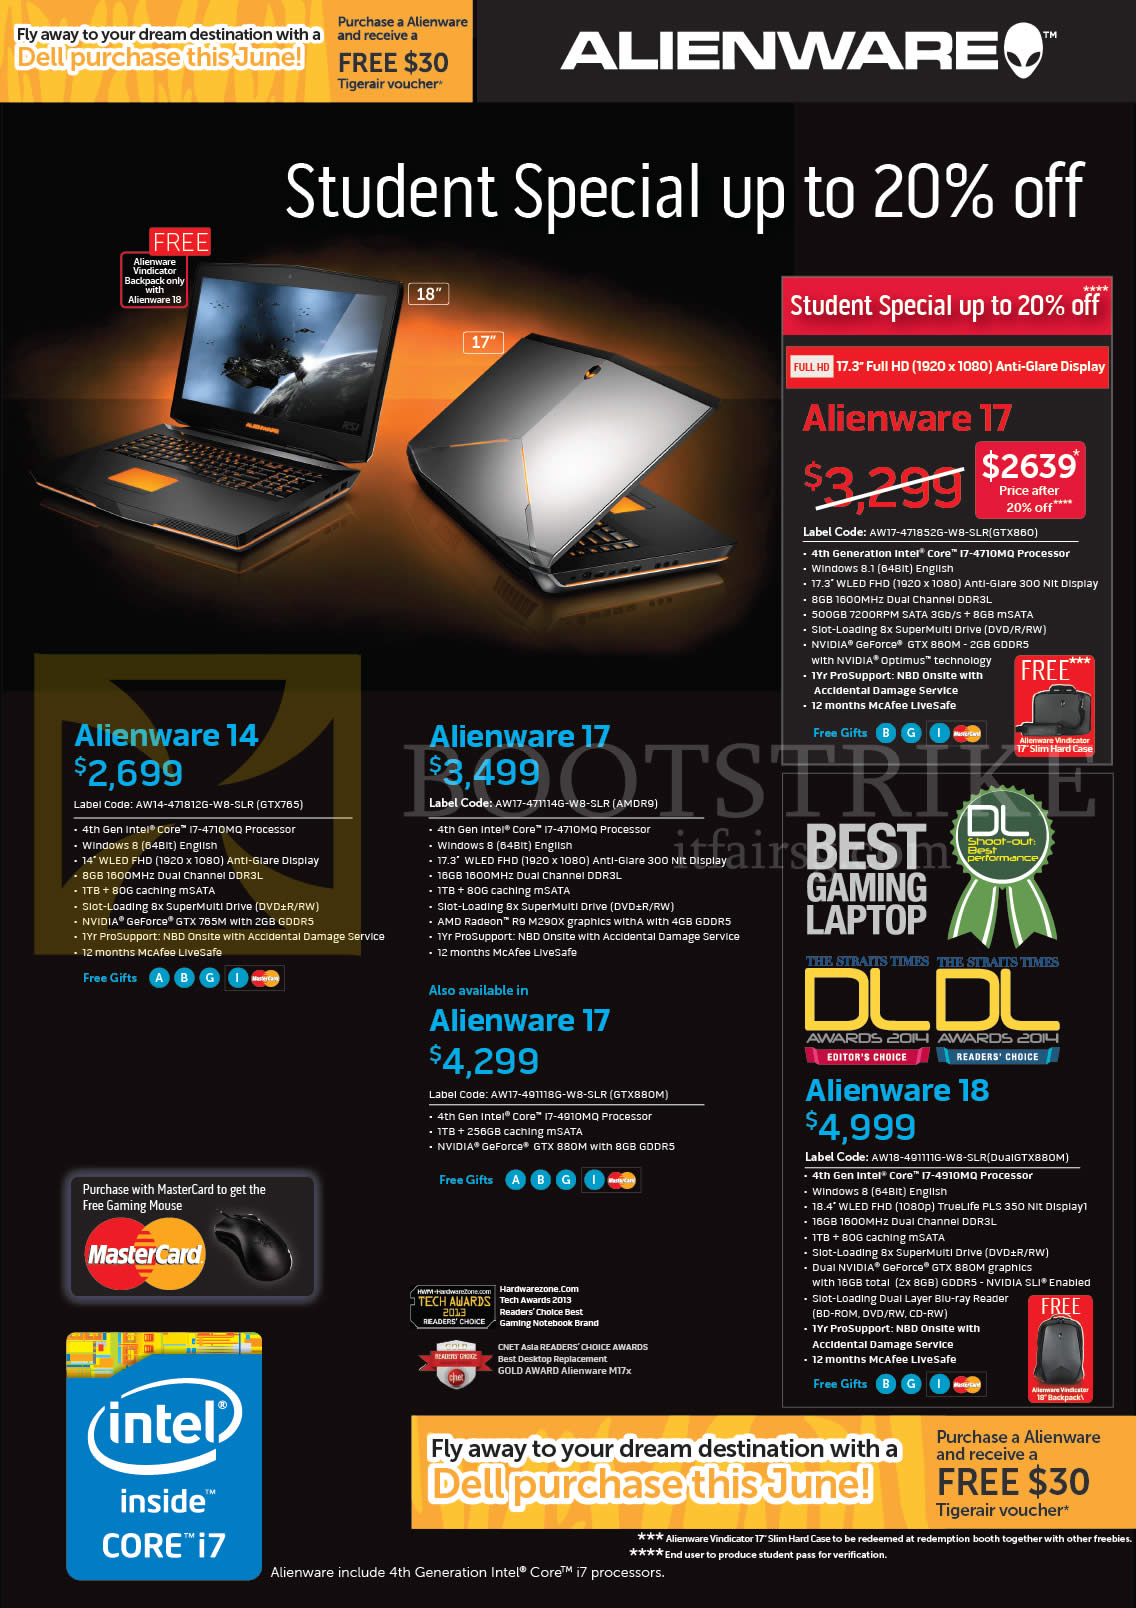 PC SHOW 2014 price list image brochure of Dell Notebooks Alienware 14, 17, 18